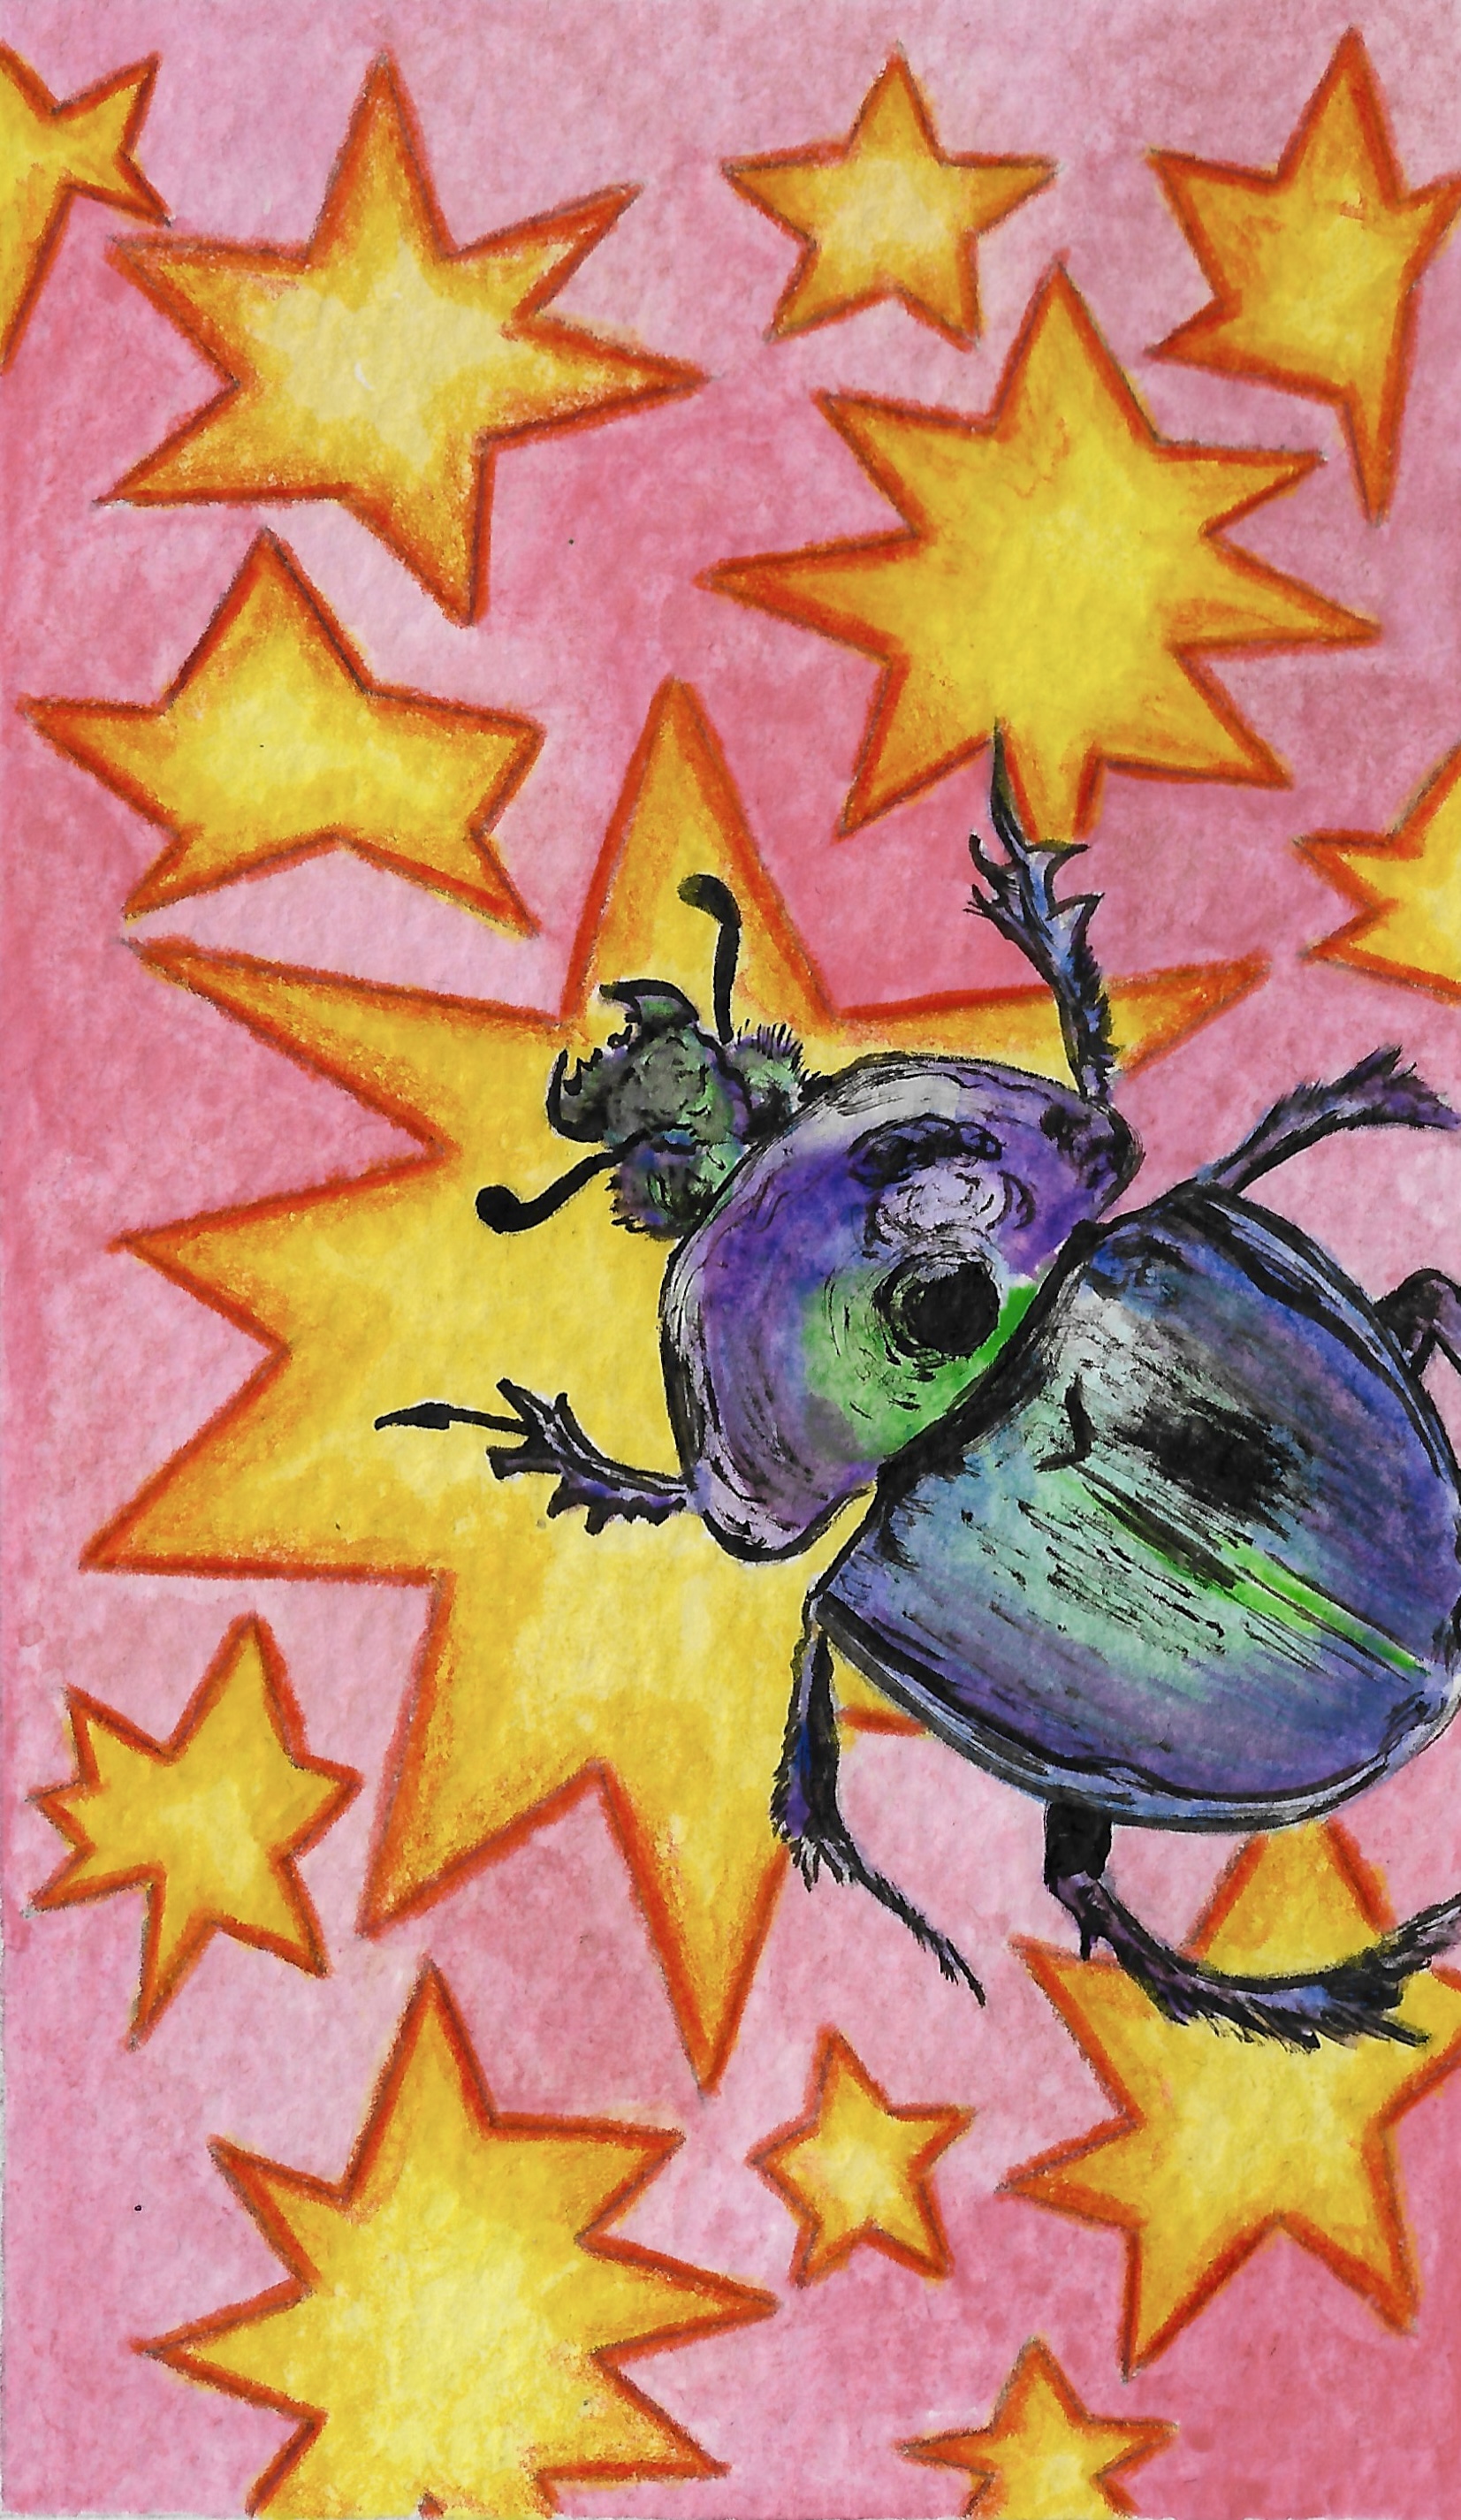 waterpaint/colour pencil illustration of a dung beetle